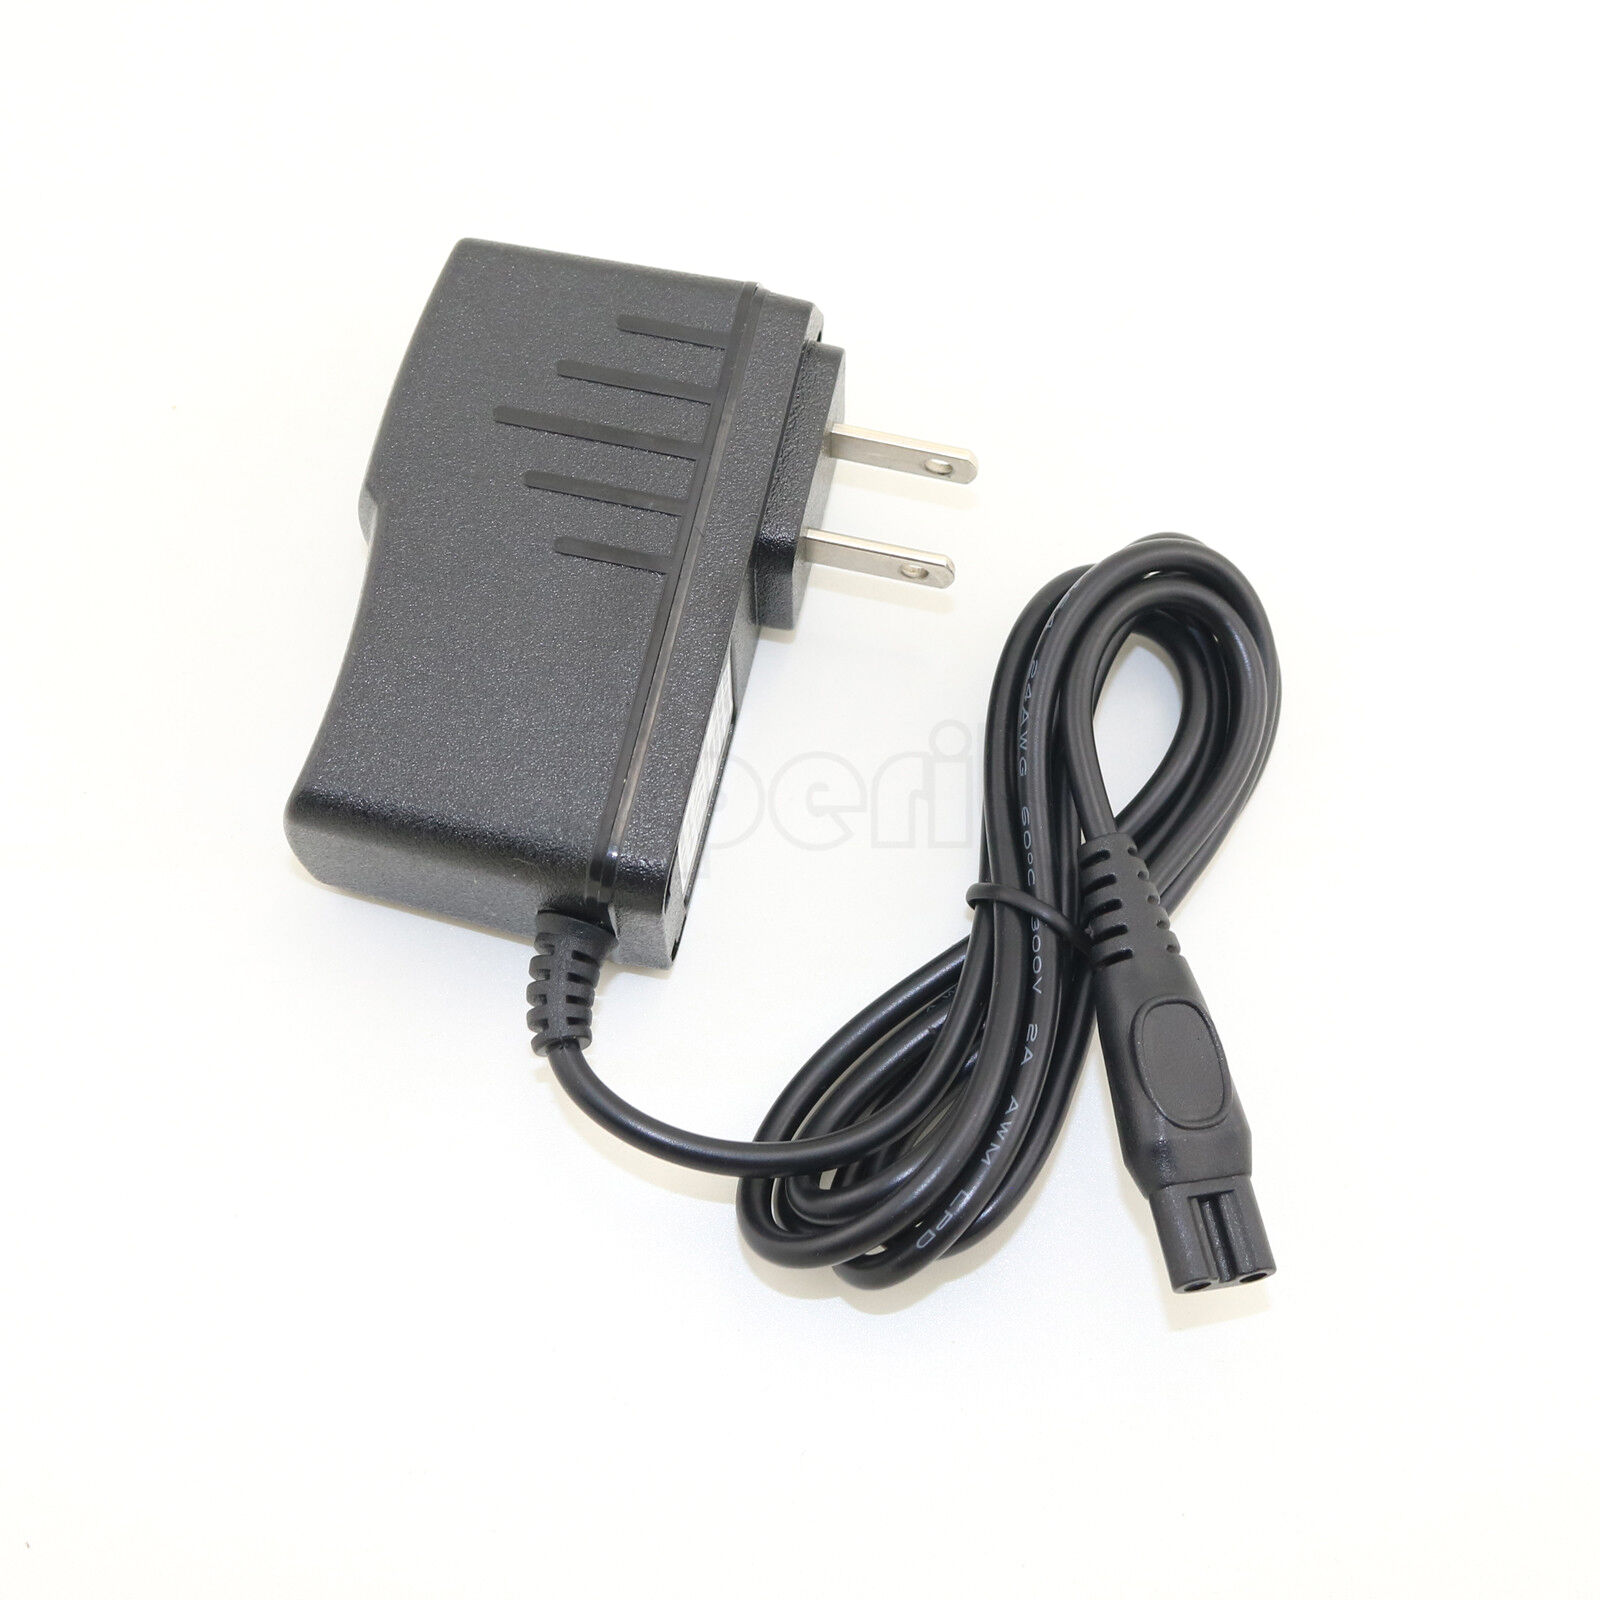 *Brand NEW*For Philip Hair Cutter HC3420 15V AC/DC Power Adapter Charger Cord Lead